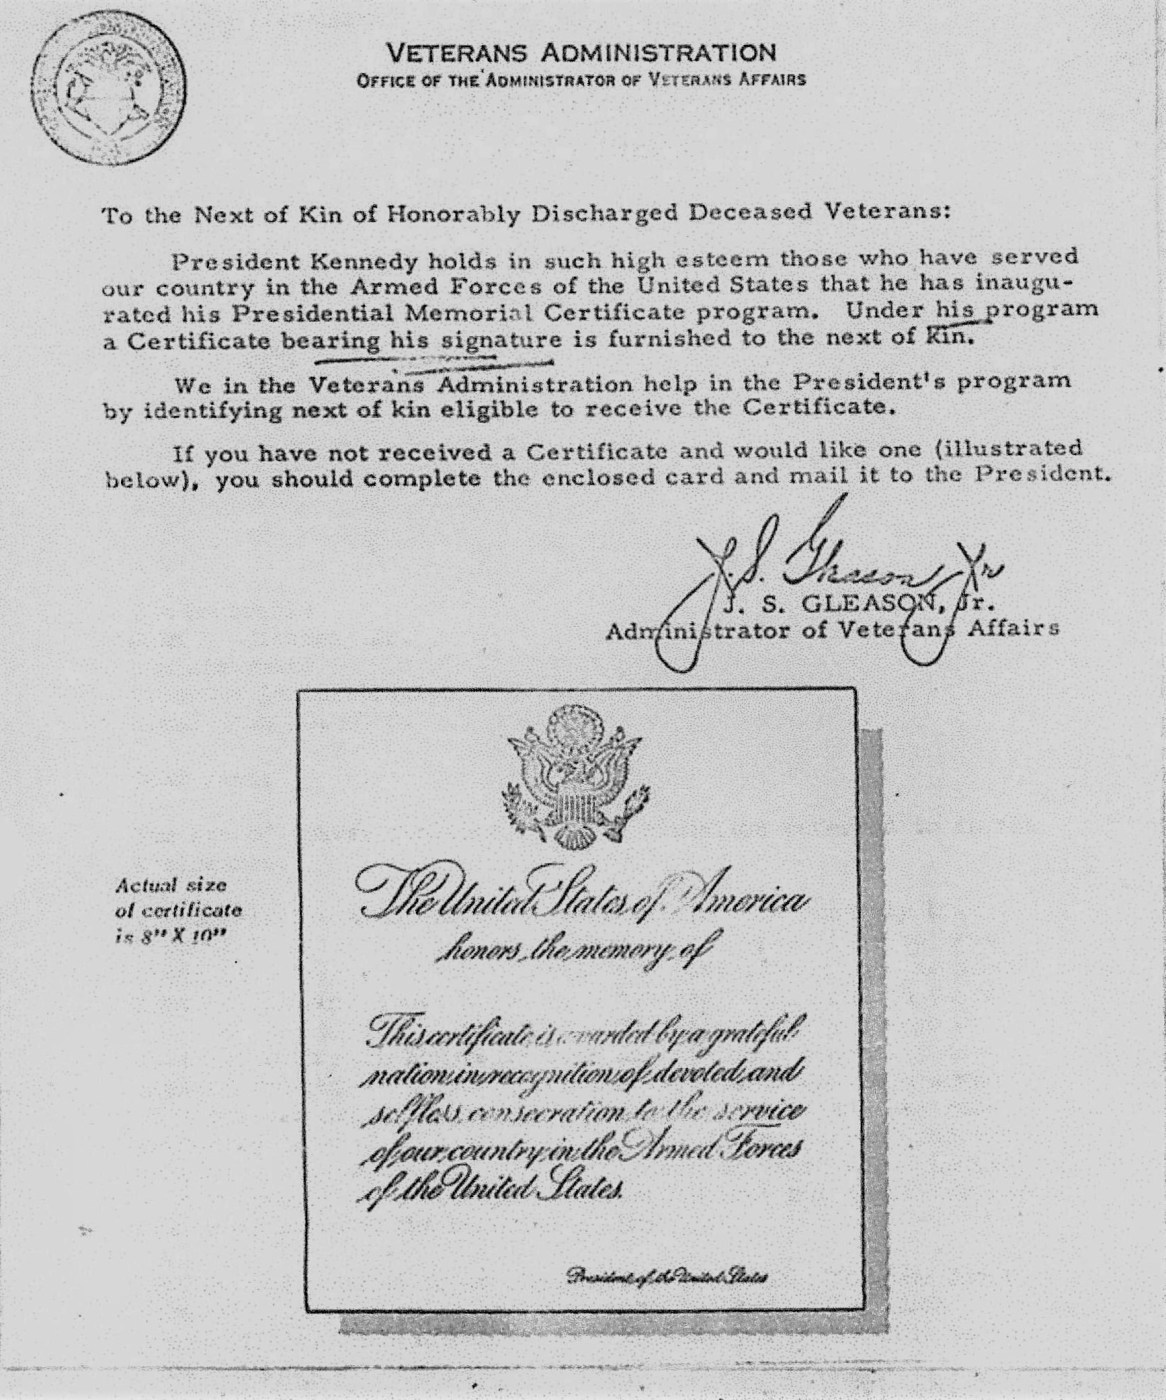 Note from Administrator Gleason in 1963 inserted in mailings to next of kin informing them of their eligibility to receive a memorial certificate. (NCA)